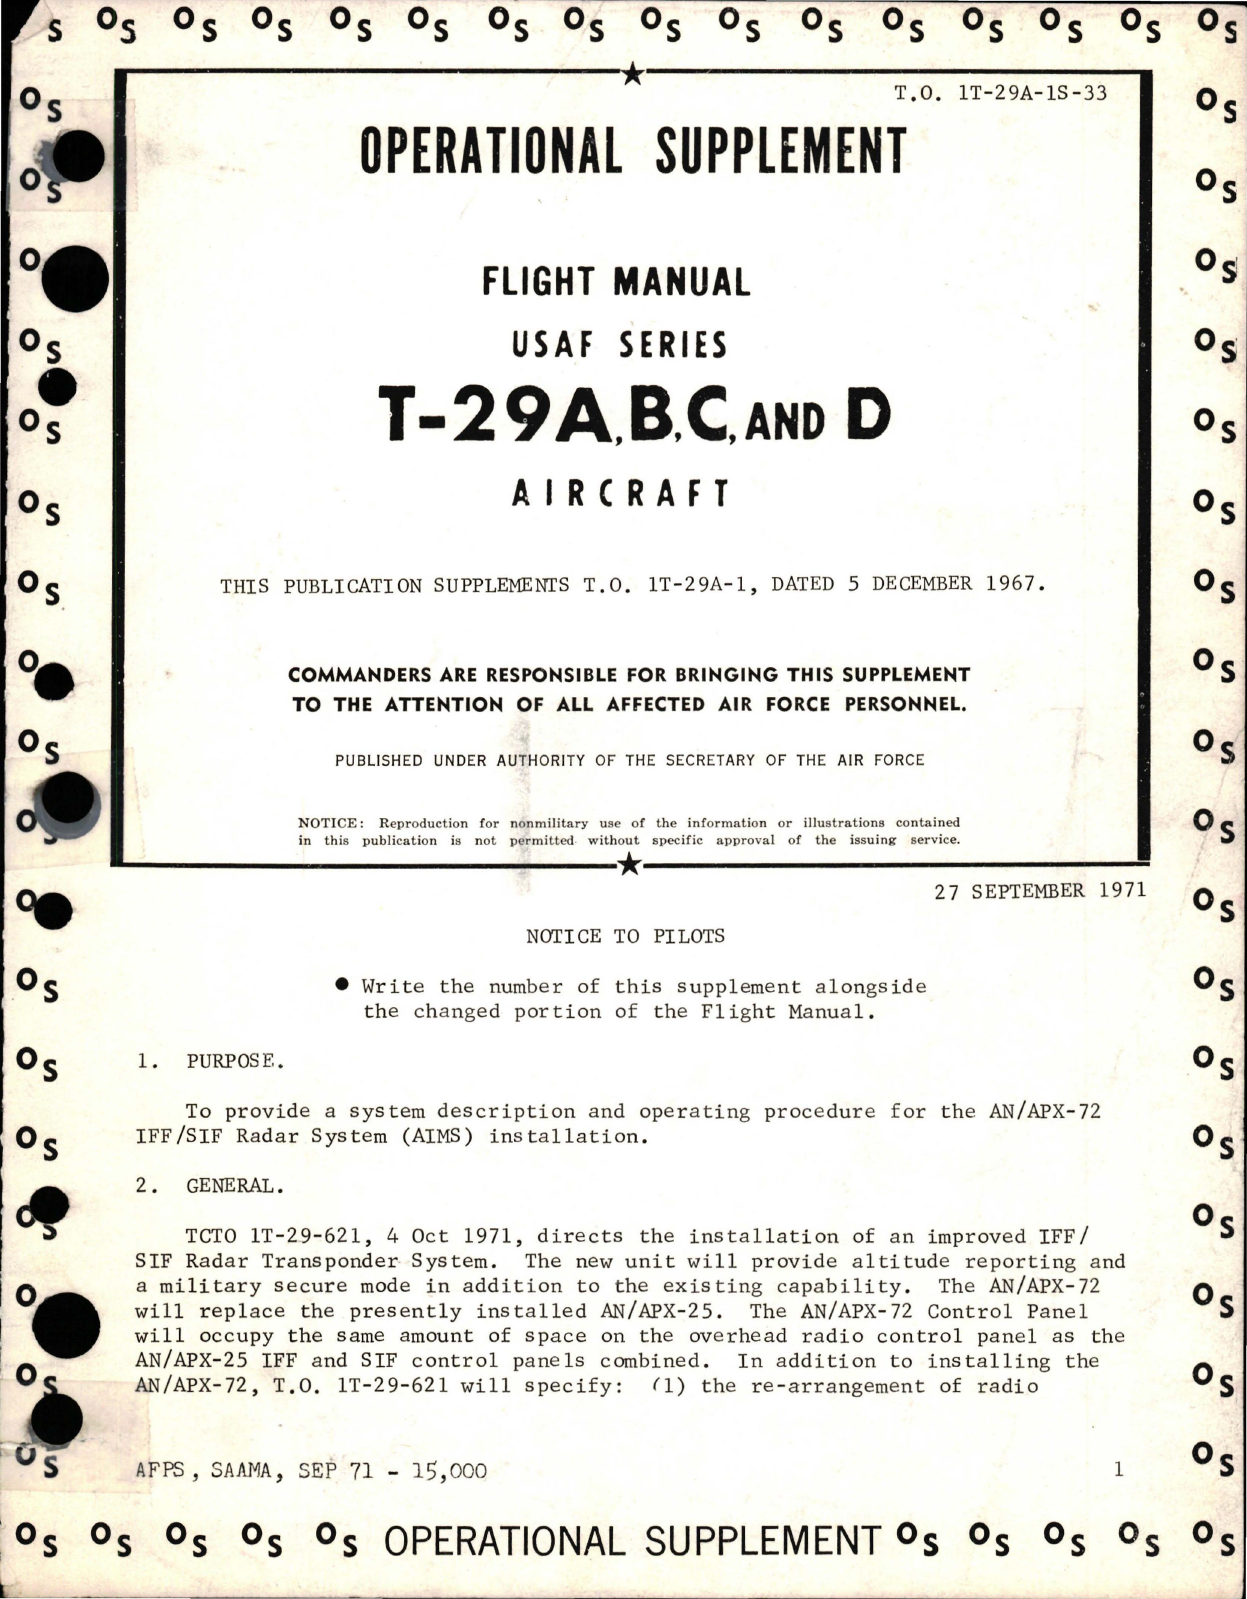 Sample page 1 from AirCorps Library document: Operational Supplement to Flight Manual for T-29A, T-29B, T-29C and T-29D